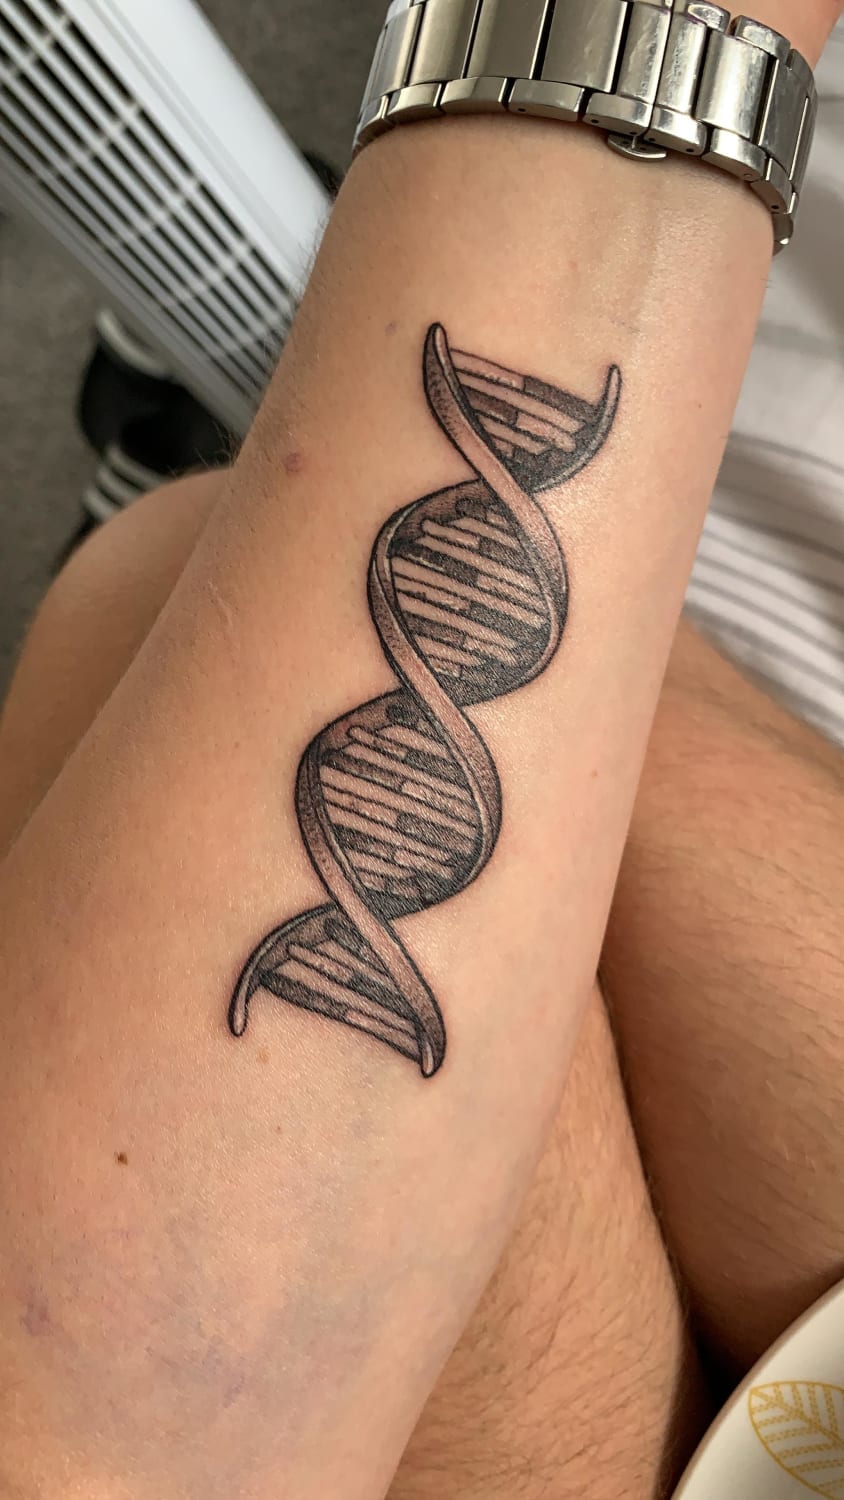 Got my first one as a tribute to a guy I donated bone marrow to at the start of the year, done by Emilia of Parlour 95, Watford, UK :)